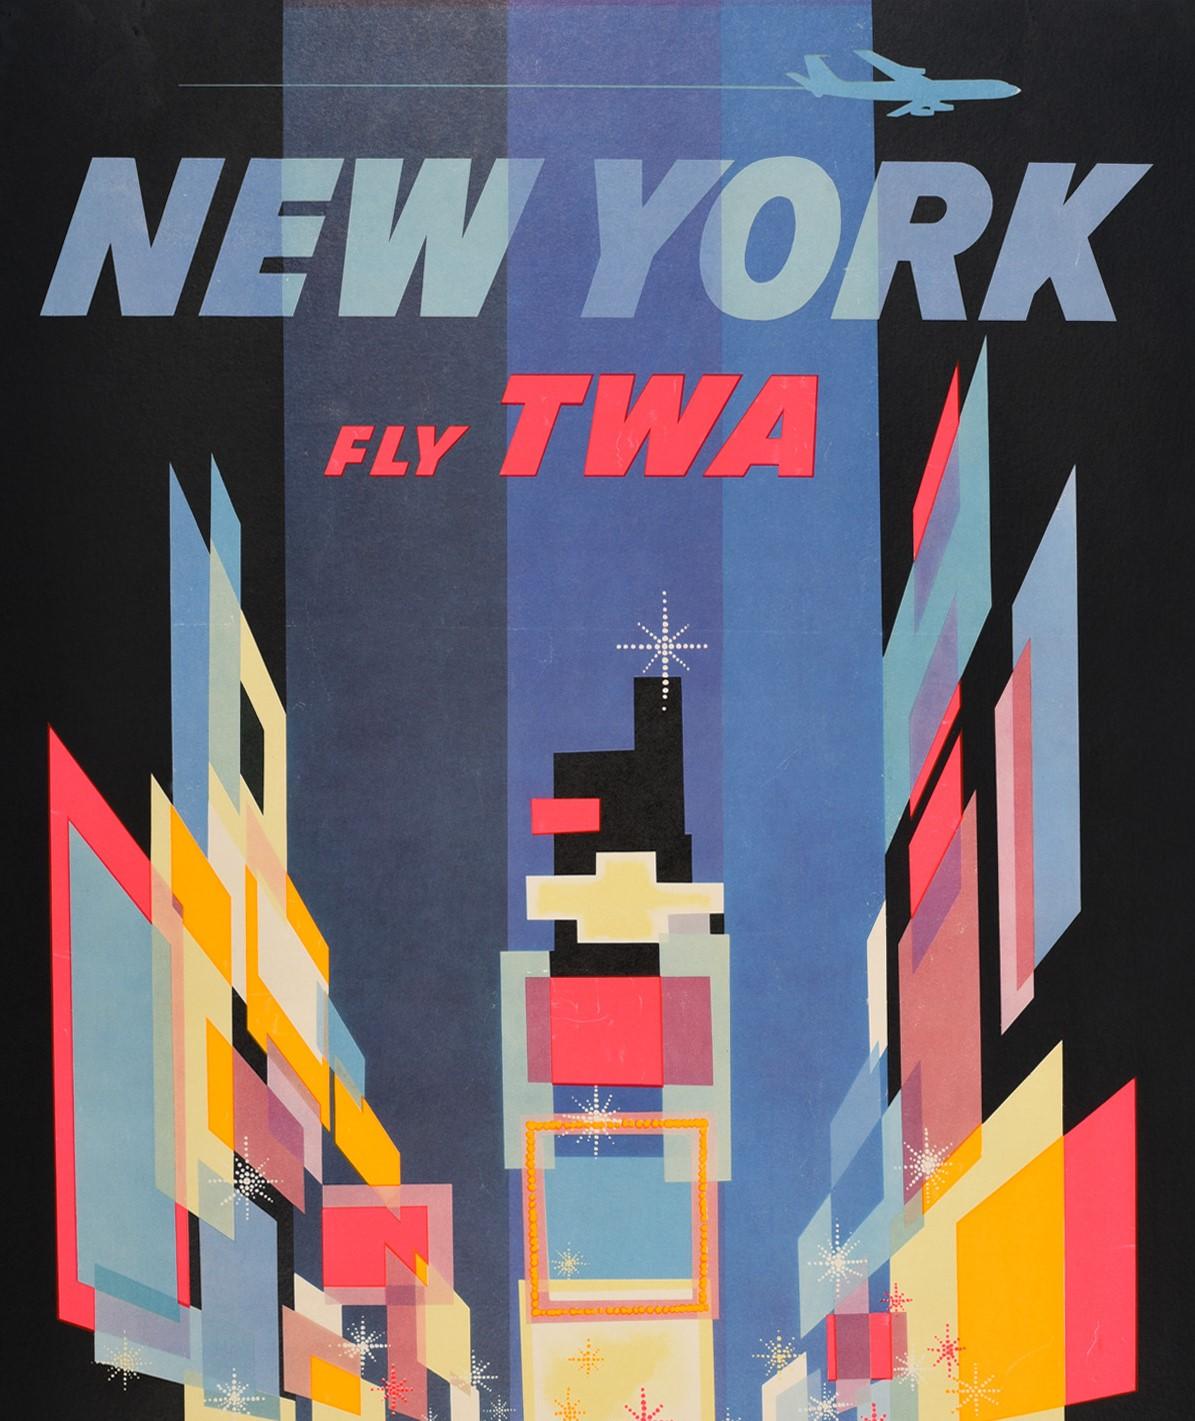 Original vintage travel poster for New York issued by TWA featuring an iconic design by the renowned American artist David Klein (1918-2005) depicting a bright and colorful abstract view of Times Square with the billboards and electric lights and